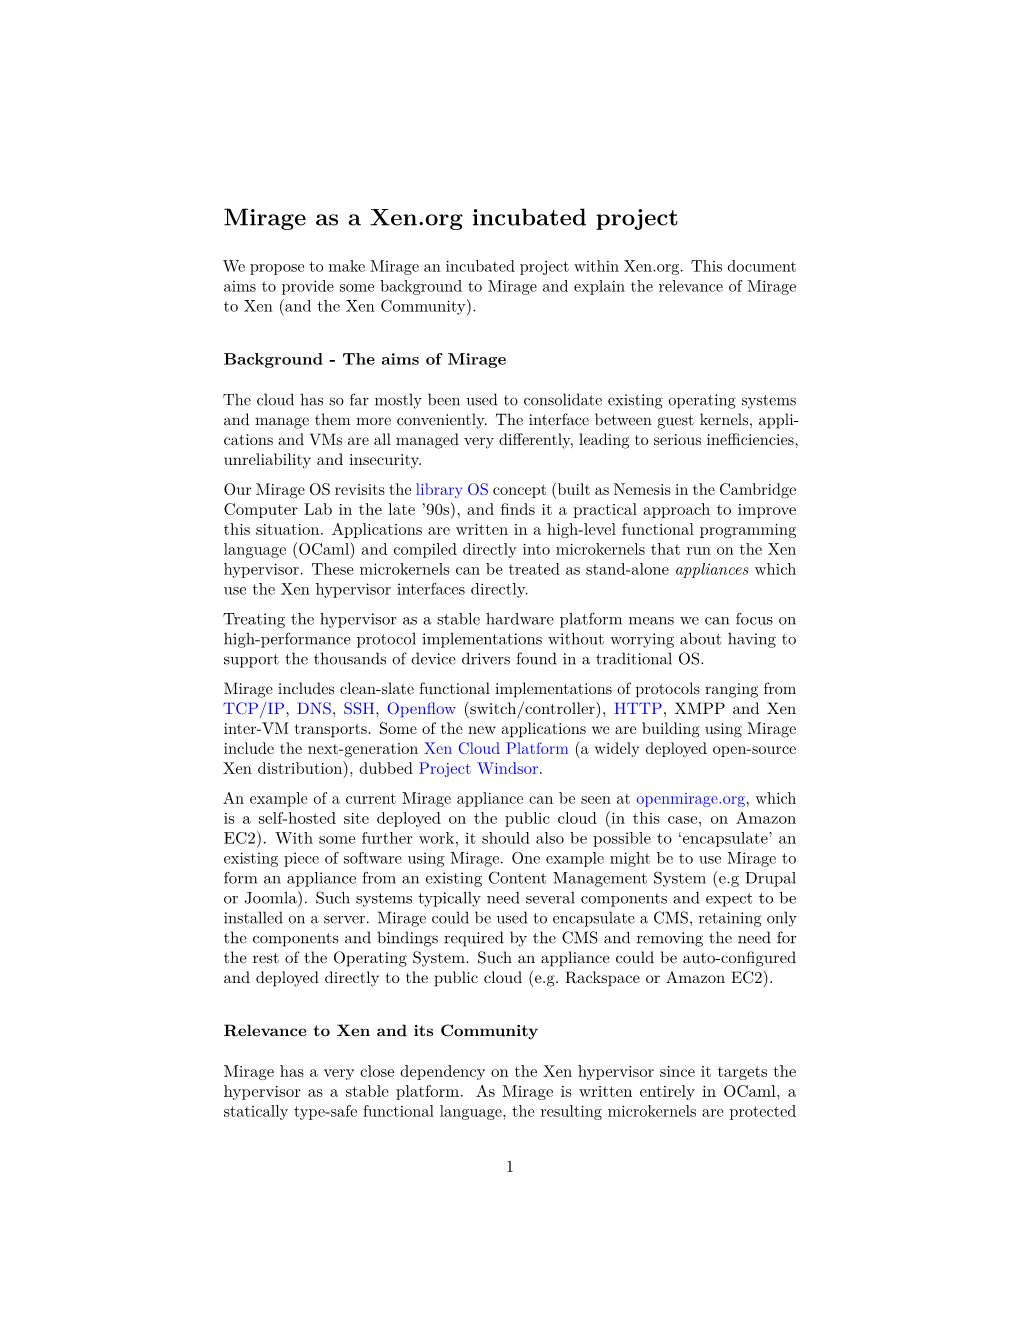 Mirage As a Xen.Org Incubated Project